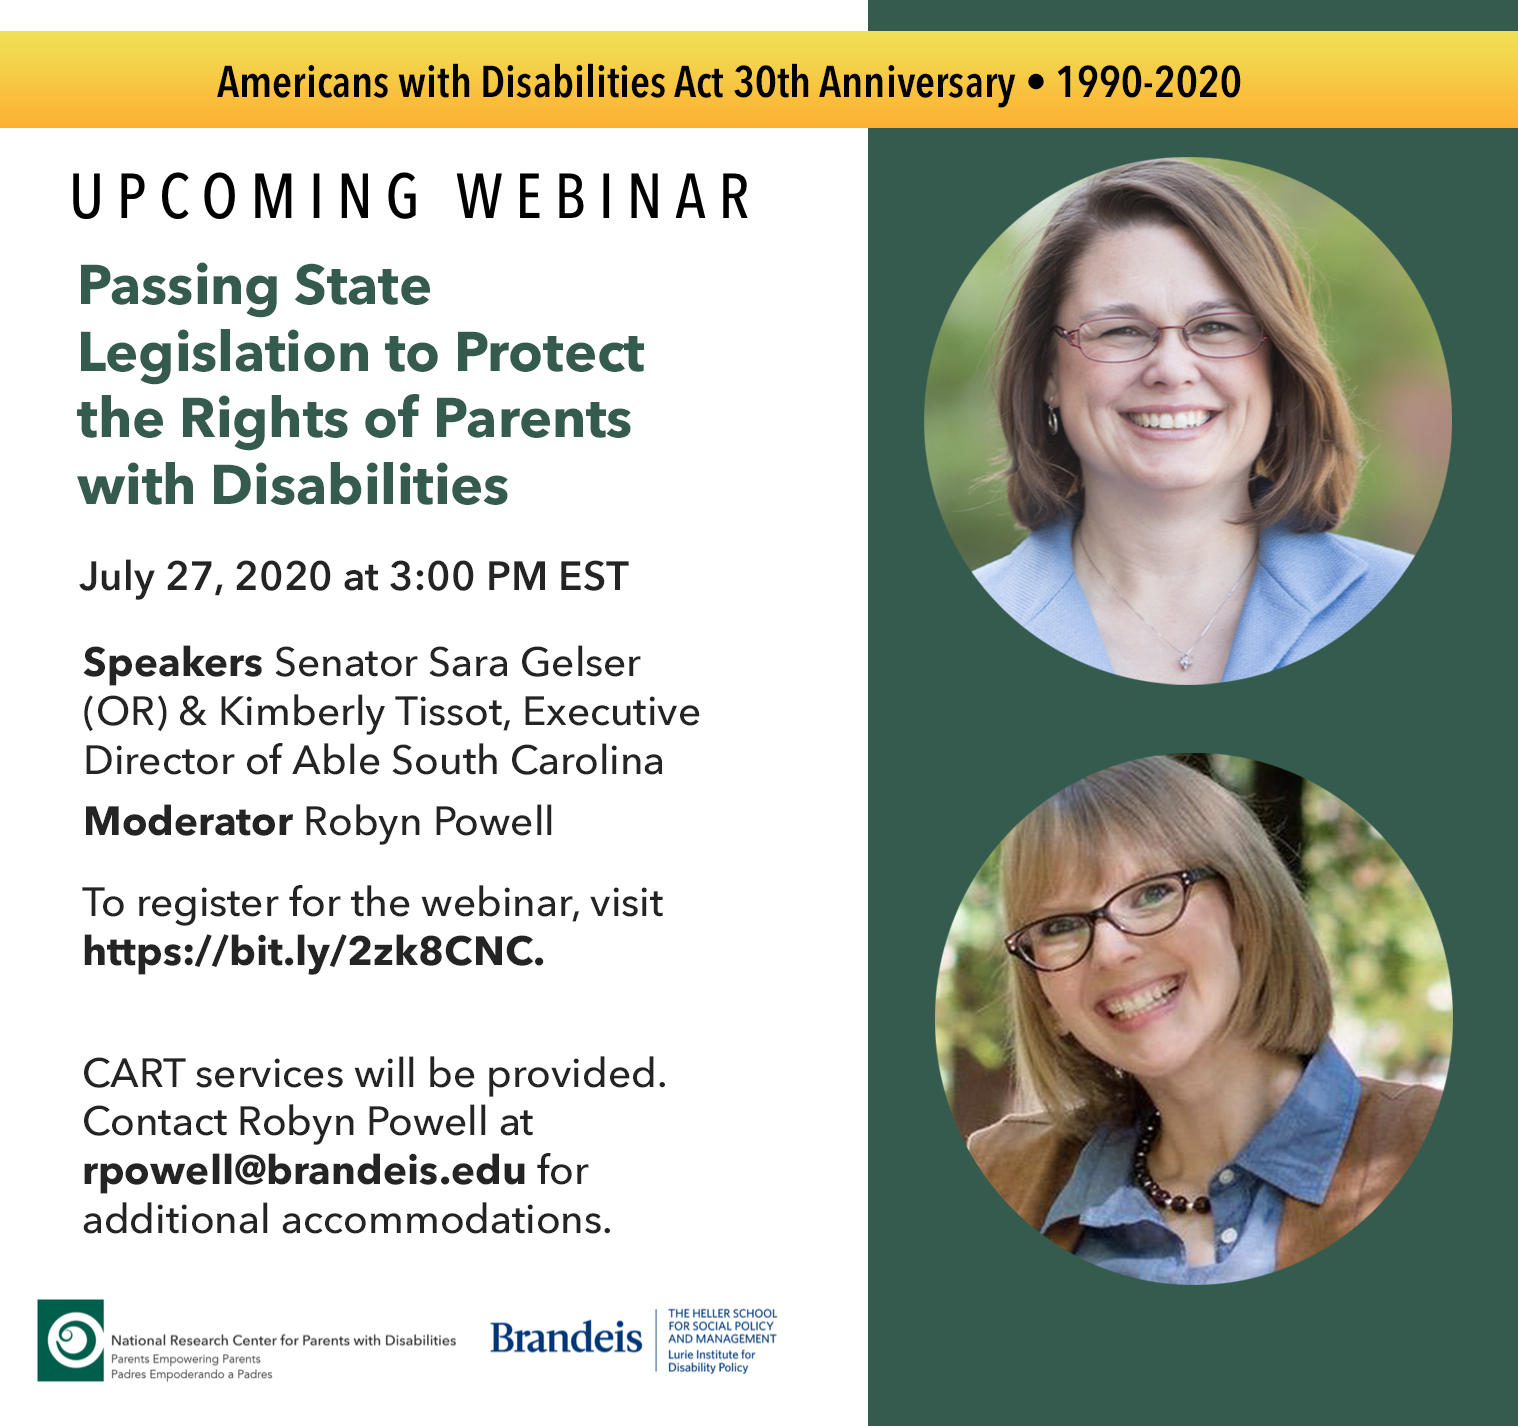 Upcoming Webinar; Passing State Legislation to Protect the Rights of Parents with Disabilities. July 27, 2020 at 3pm EST. Speakers are Oregon Senator Sara Gelser, and Kimberly Tissot, Executive Director of Able South Carolina. Moderator: Robyn Powell. To register for the webinar, visit https://bit.ly/2zk8CNC. CART services will be provided. Contact Robyn Powell at rpowell@brandeis.edu for additional accommodations. Speakers are pictured on the right, smiling. Senator Gelser is pictured on top, and Kimberly Tissot is pictured on the bottom. On the top of the flyer is a yellow banner reading 'Americans with Disabilities Act 30th Anniversary, 1990-2020' On the bottom of the flyer are logos for the National Research Center for Parents with Disabilities, and the Lurie Institute for Disability Policy.